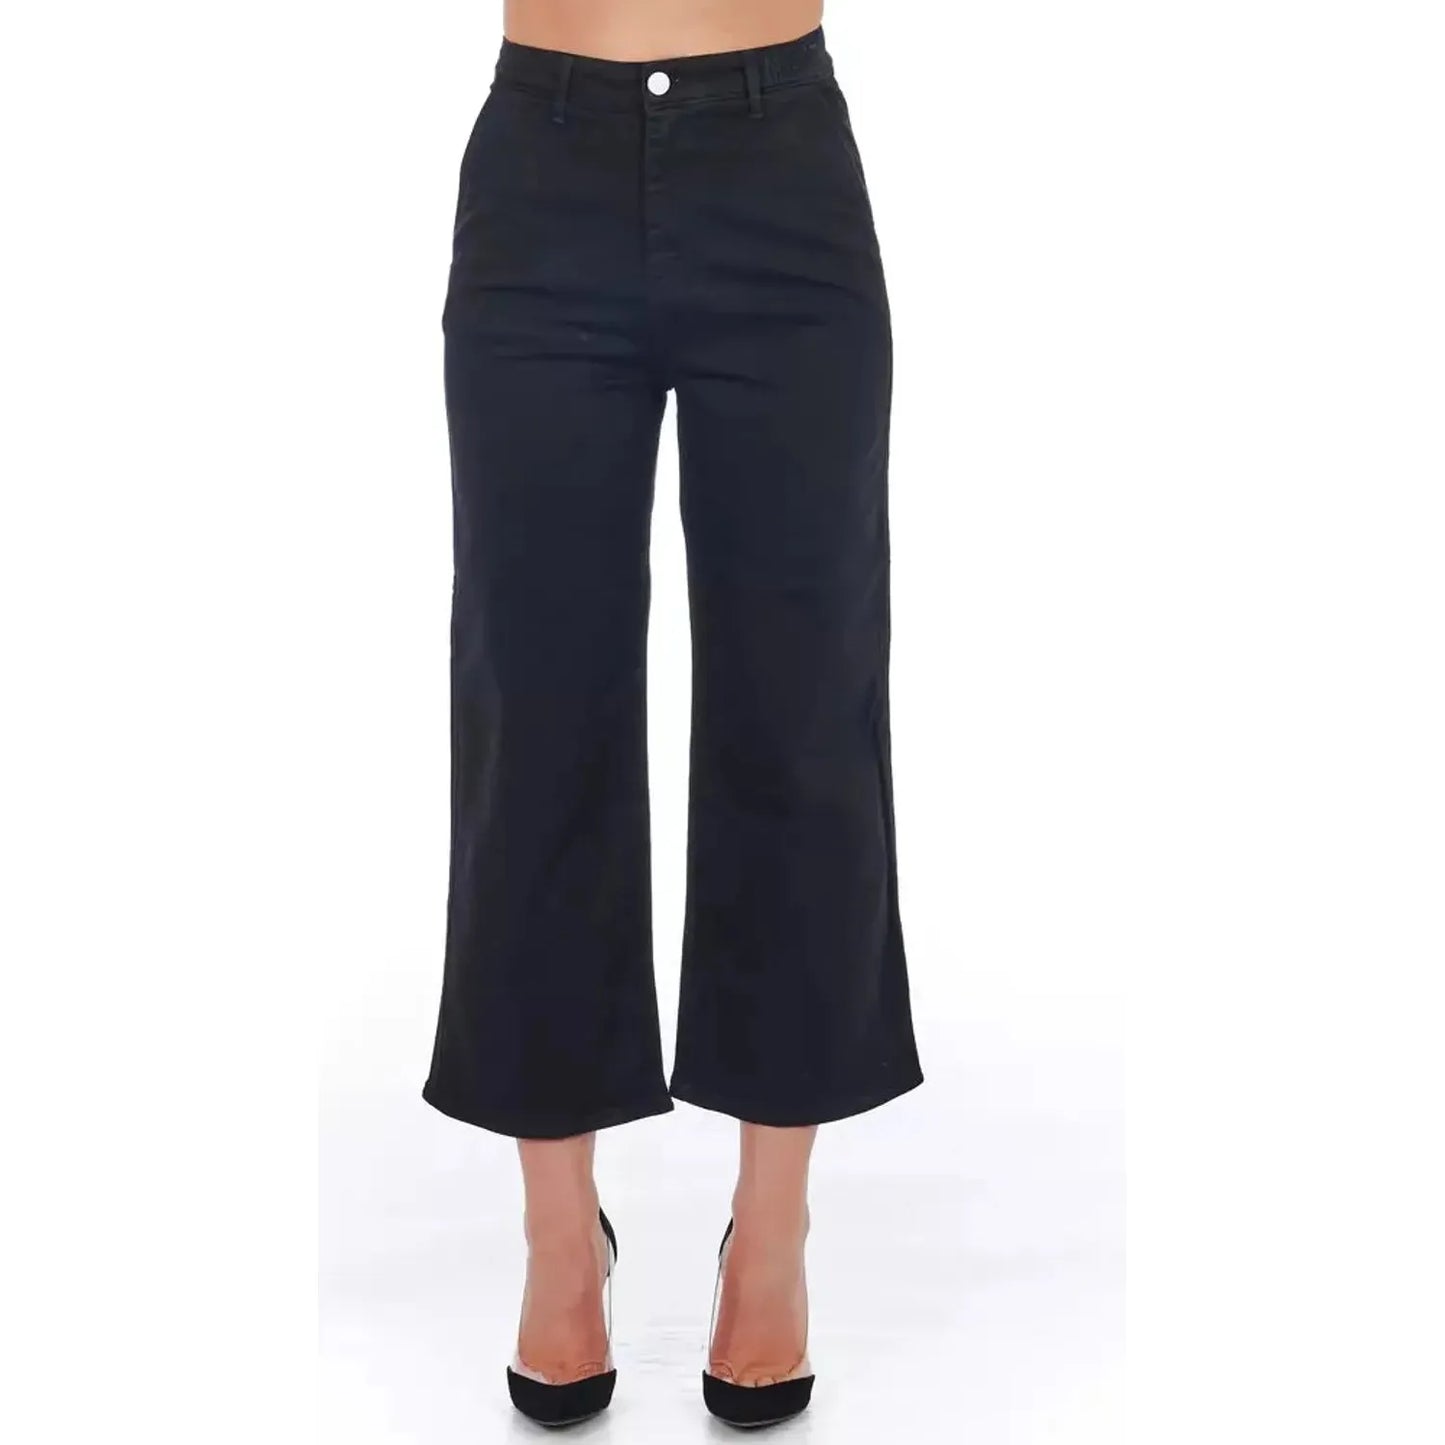 Frankie Morello Chic High-Waist Cropped Trousers nblack-jeans-pant